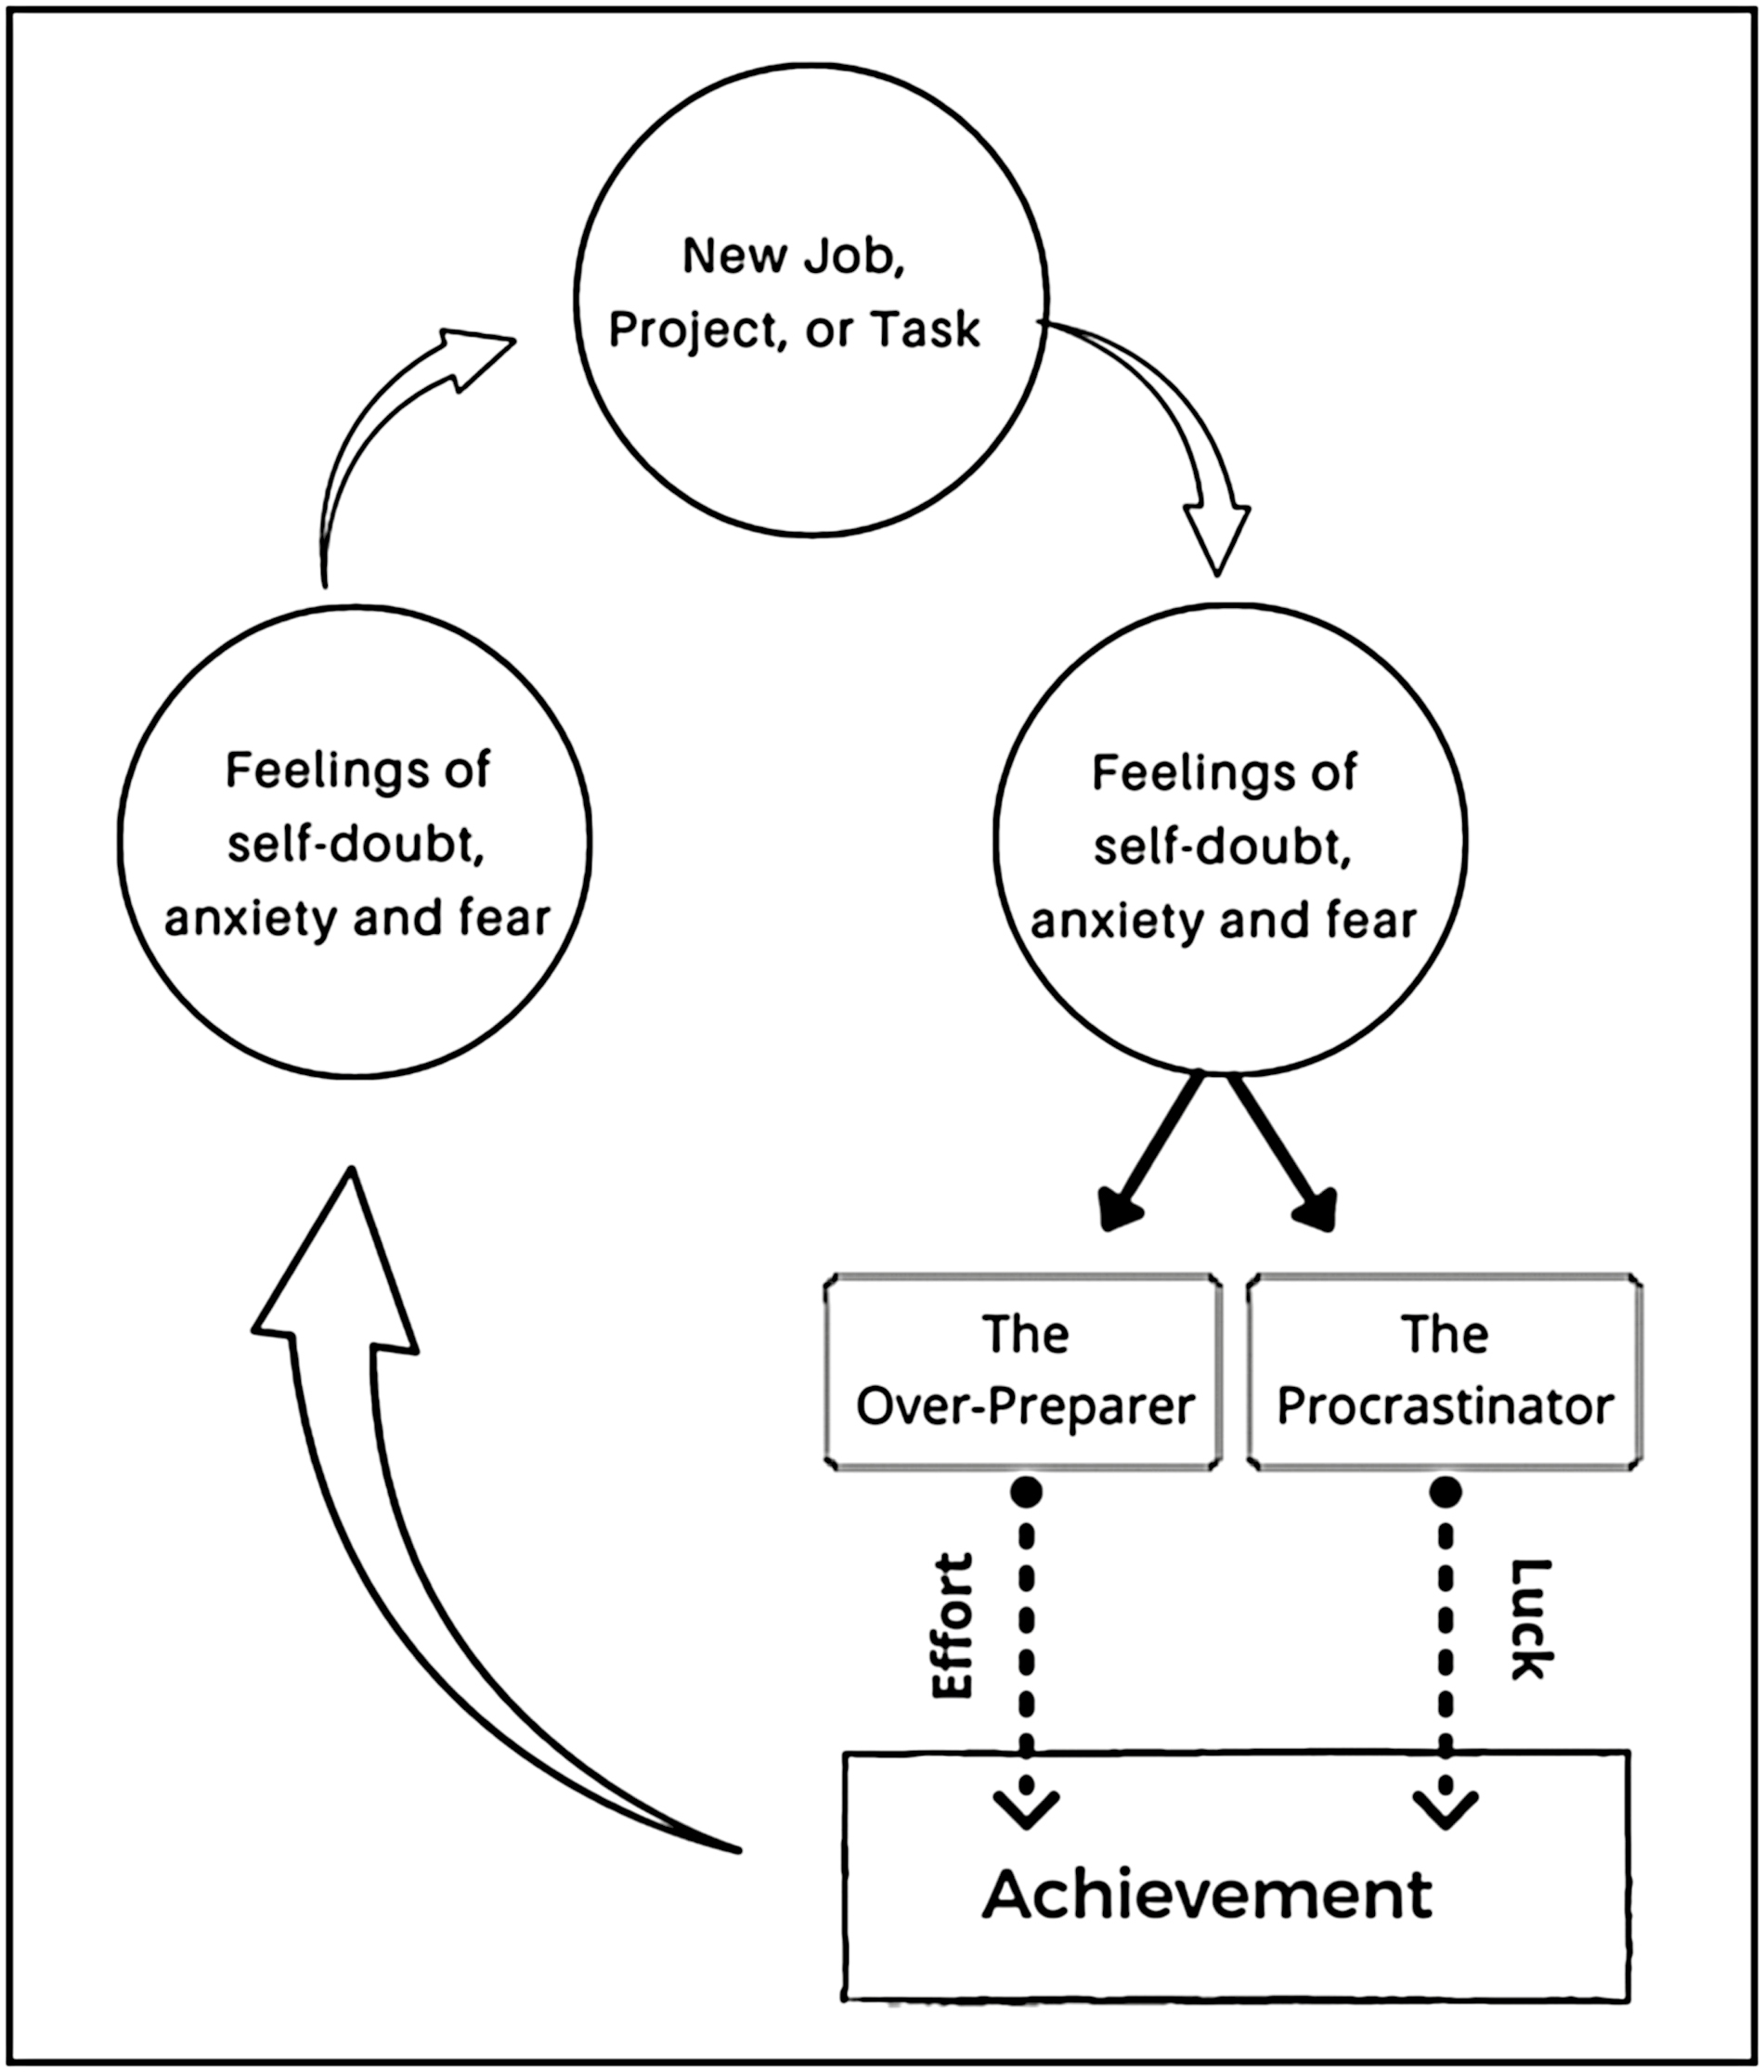 The impostor phenomenon cycle (adapted from Williams [4]).